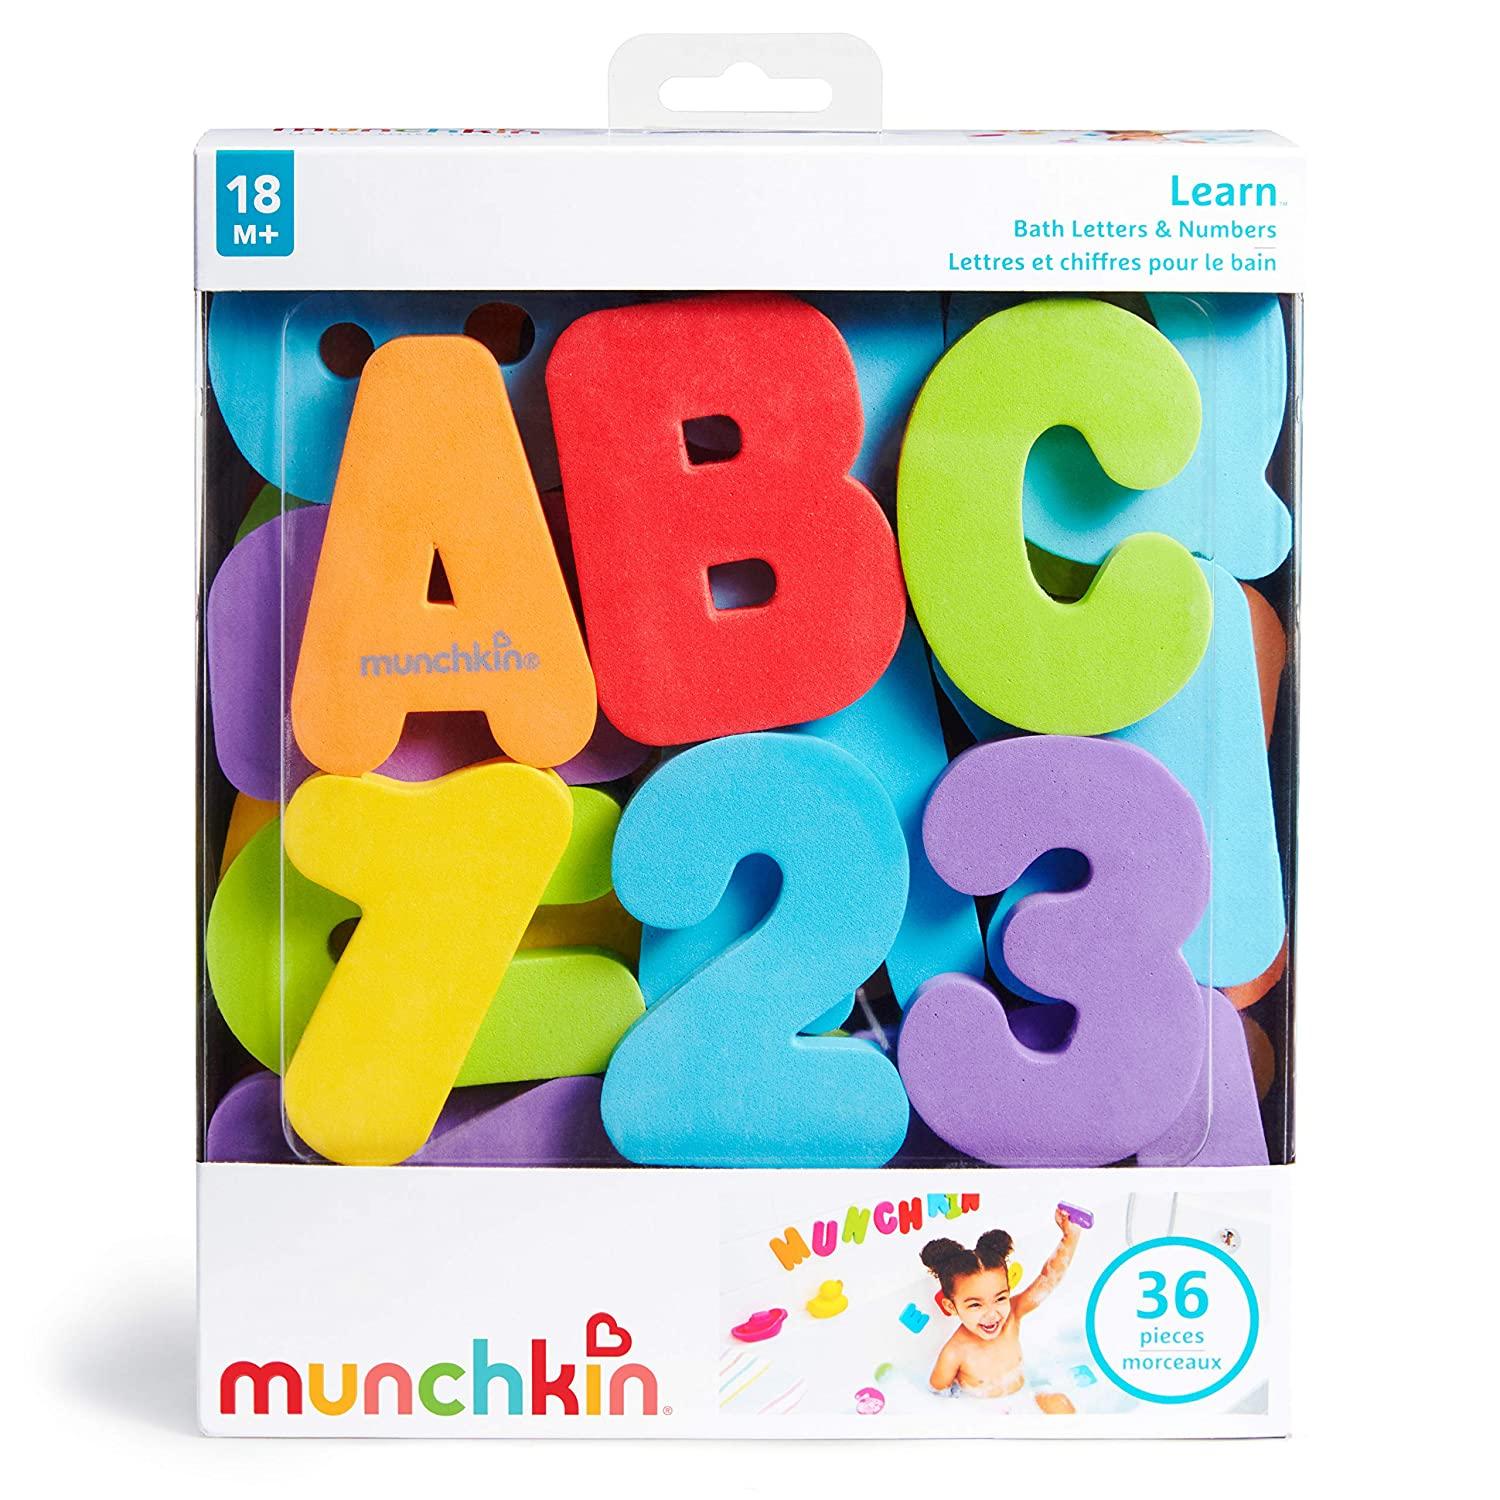 Munchkin Letters and Numbers Bath Toys for $4.48